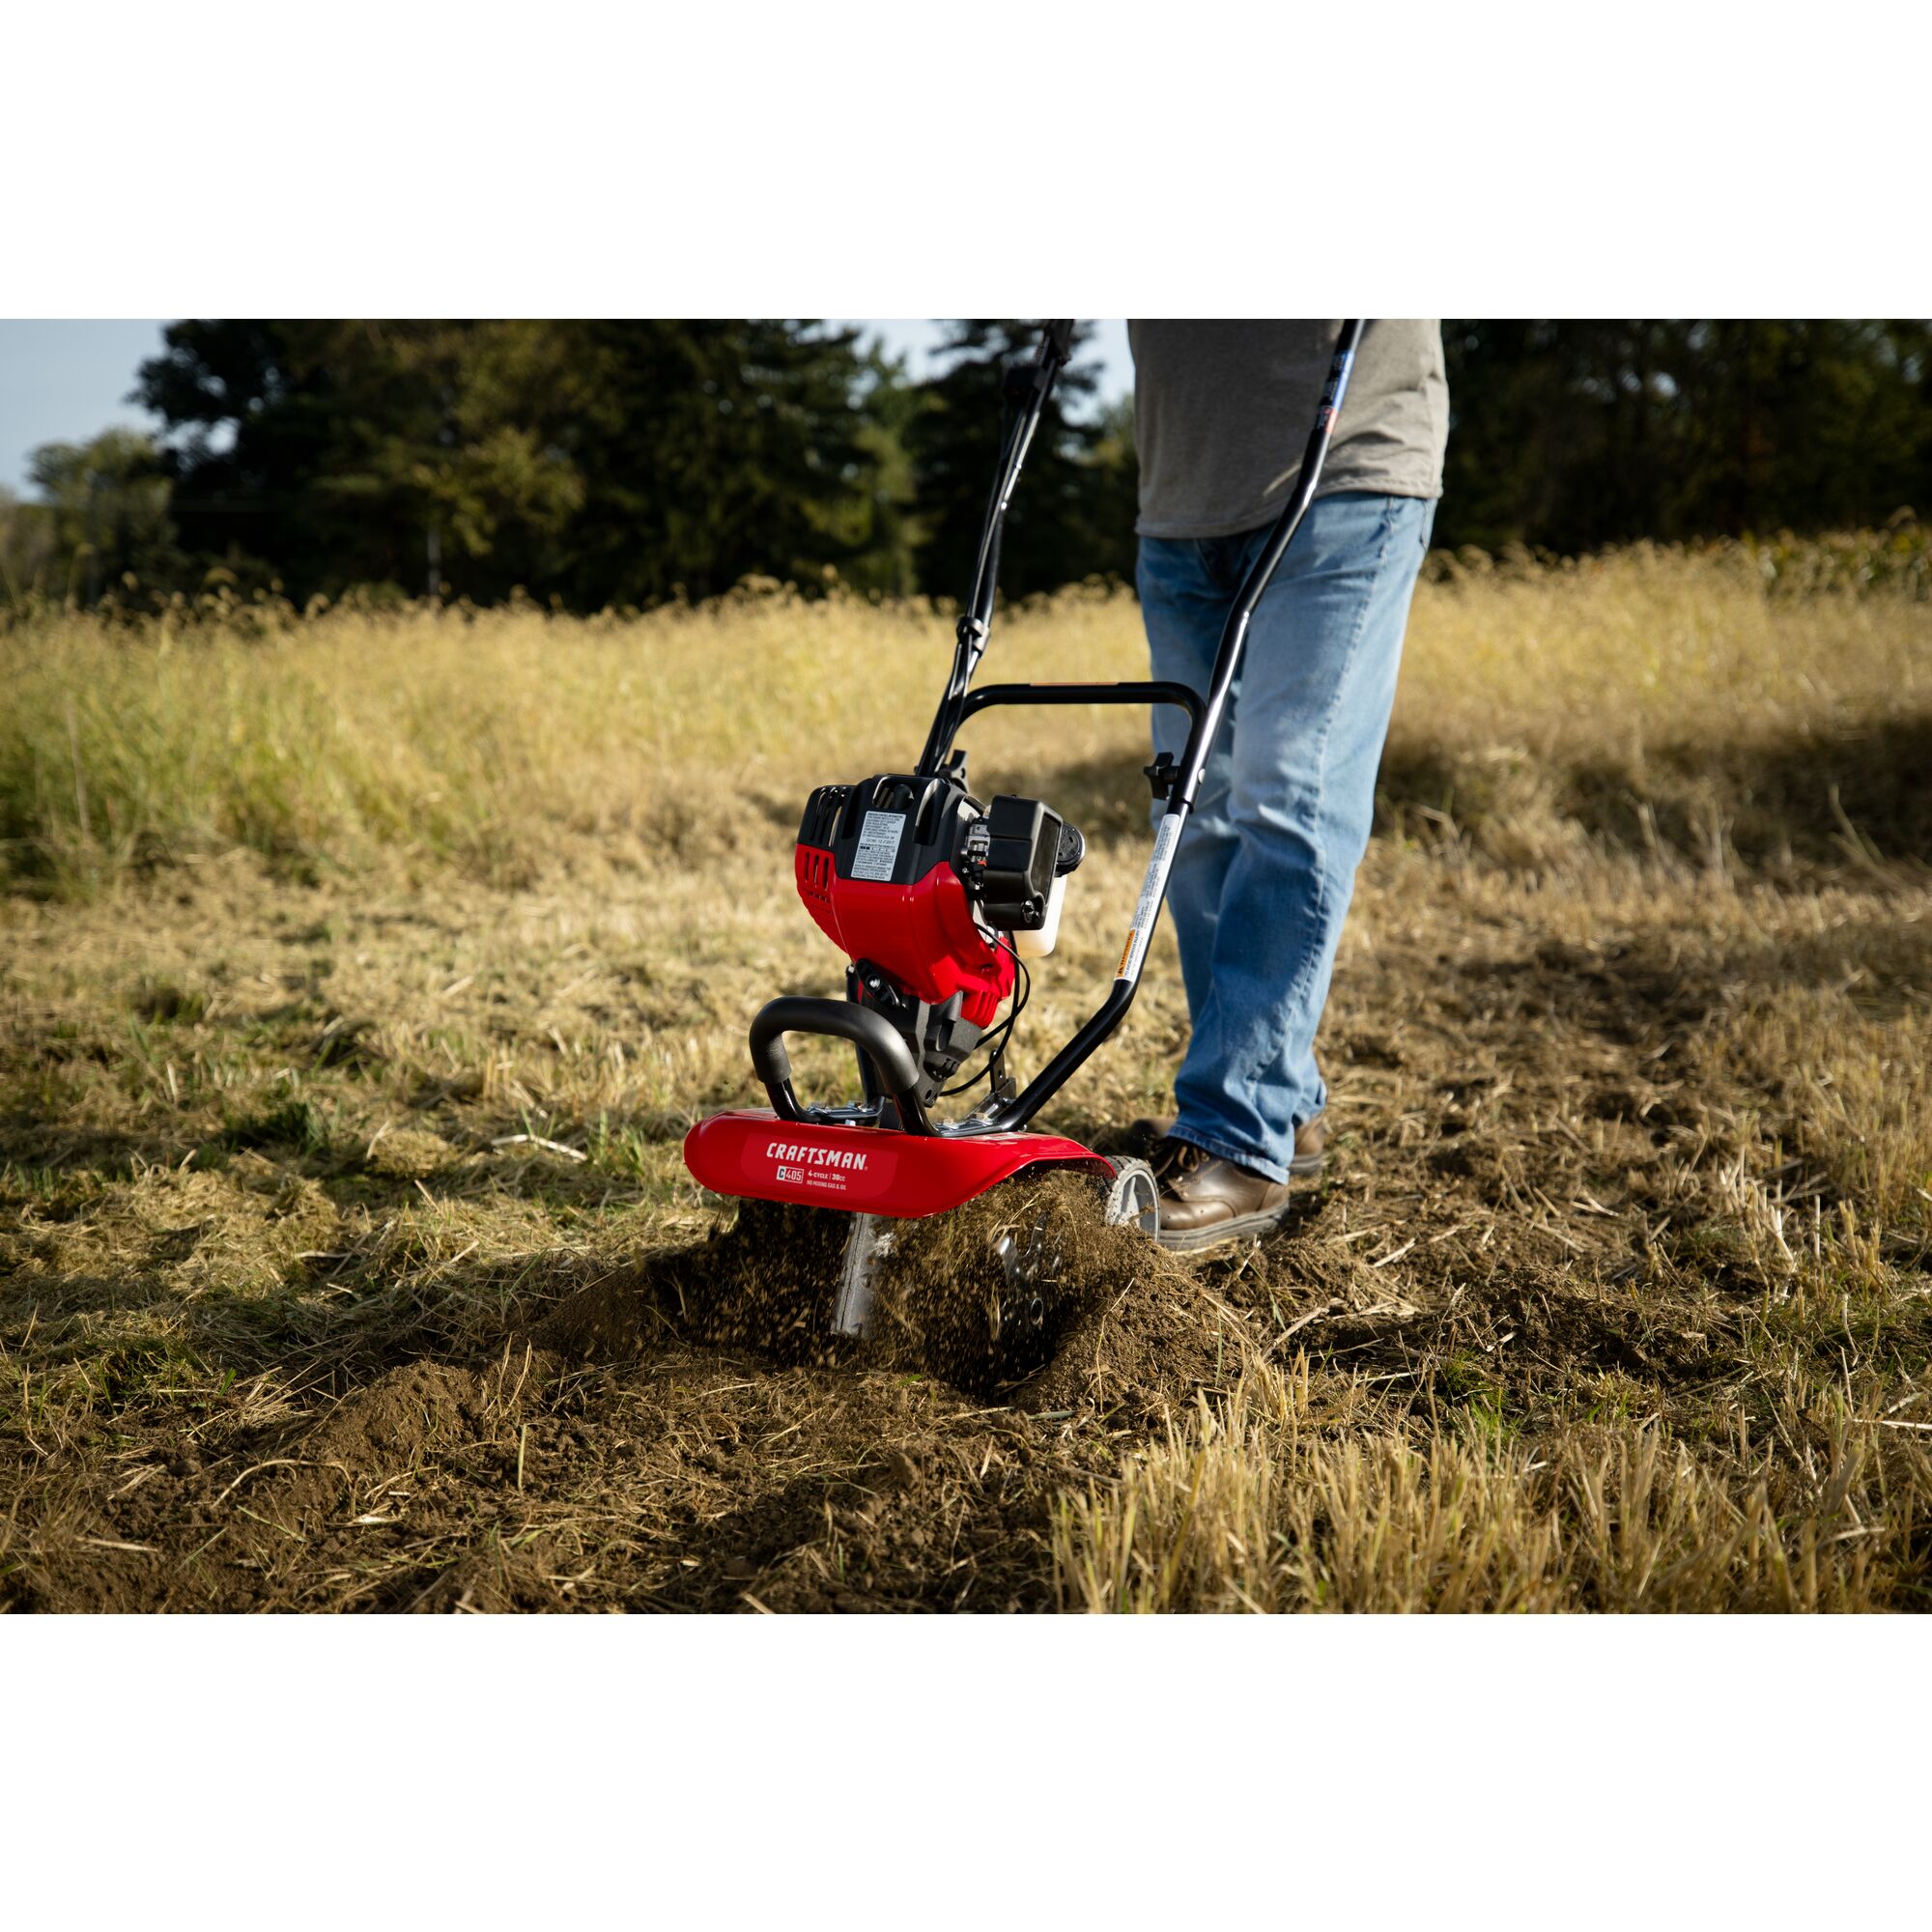 CRAFTSMAN gas cultivator cultivating field in side view in jeans and gray shirt